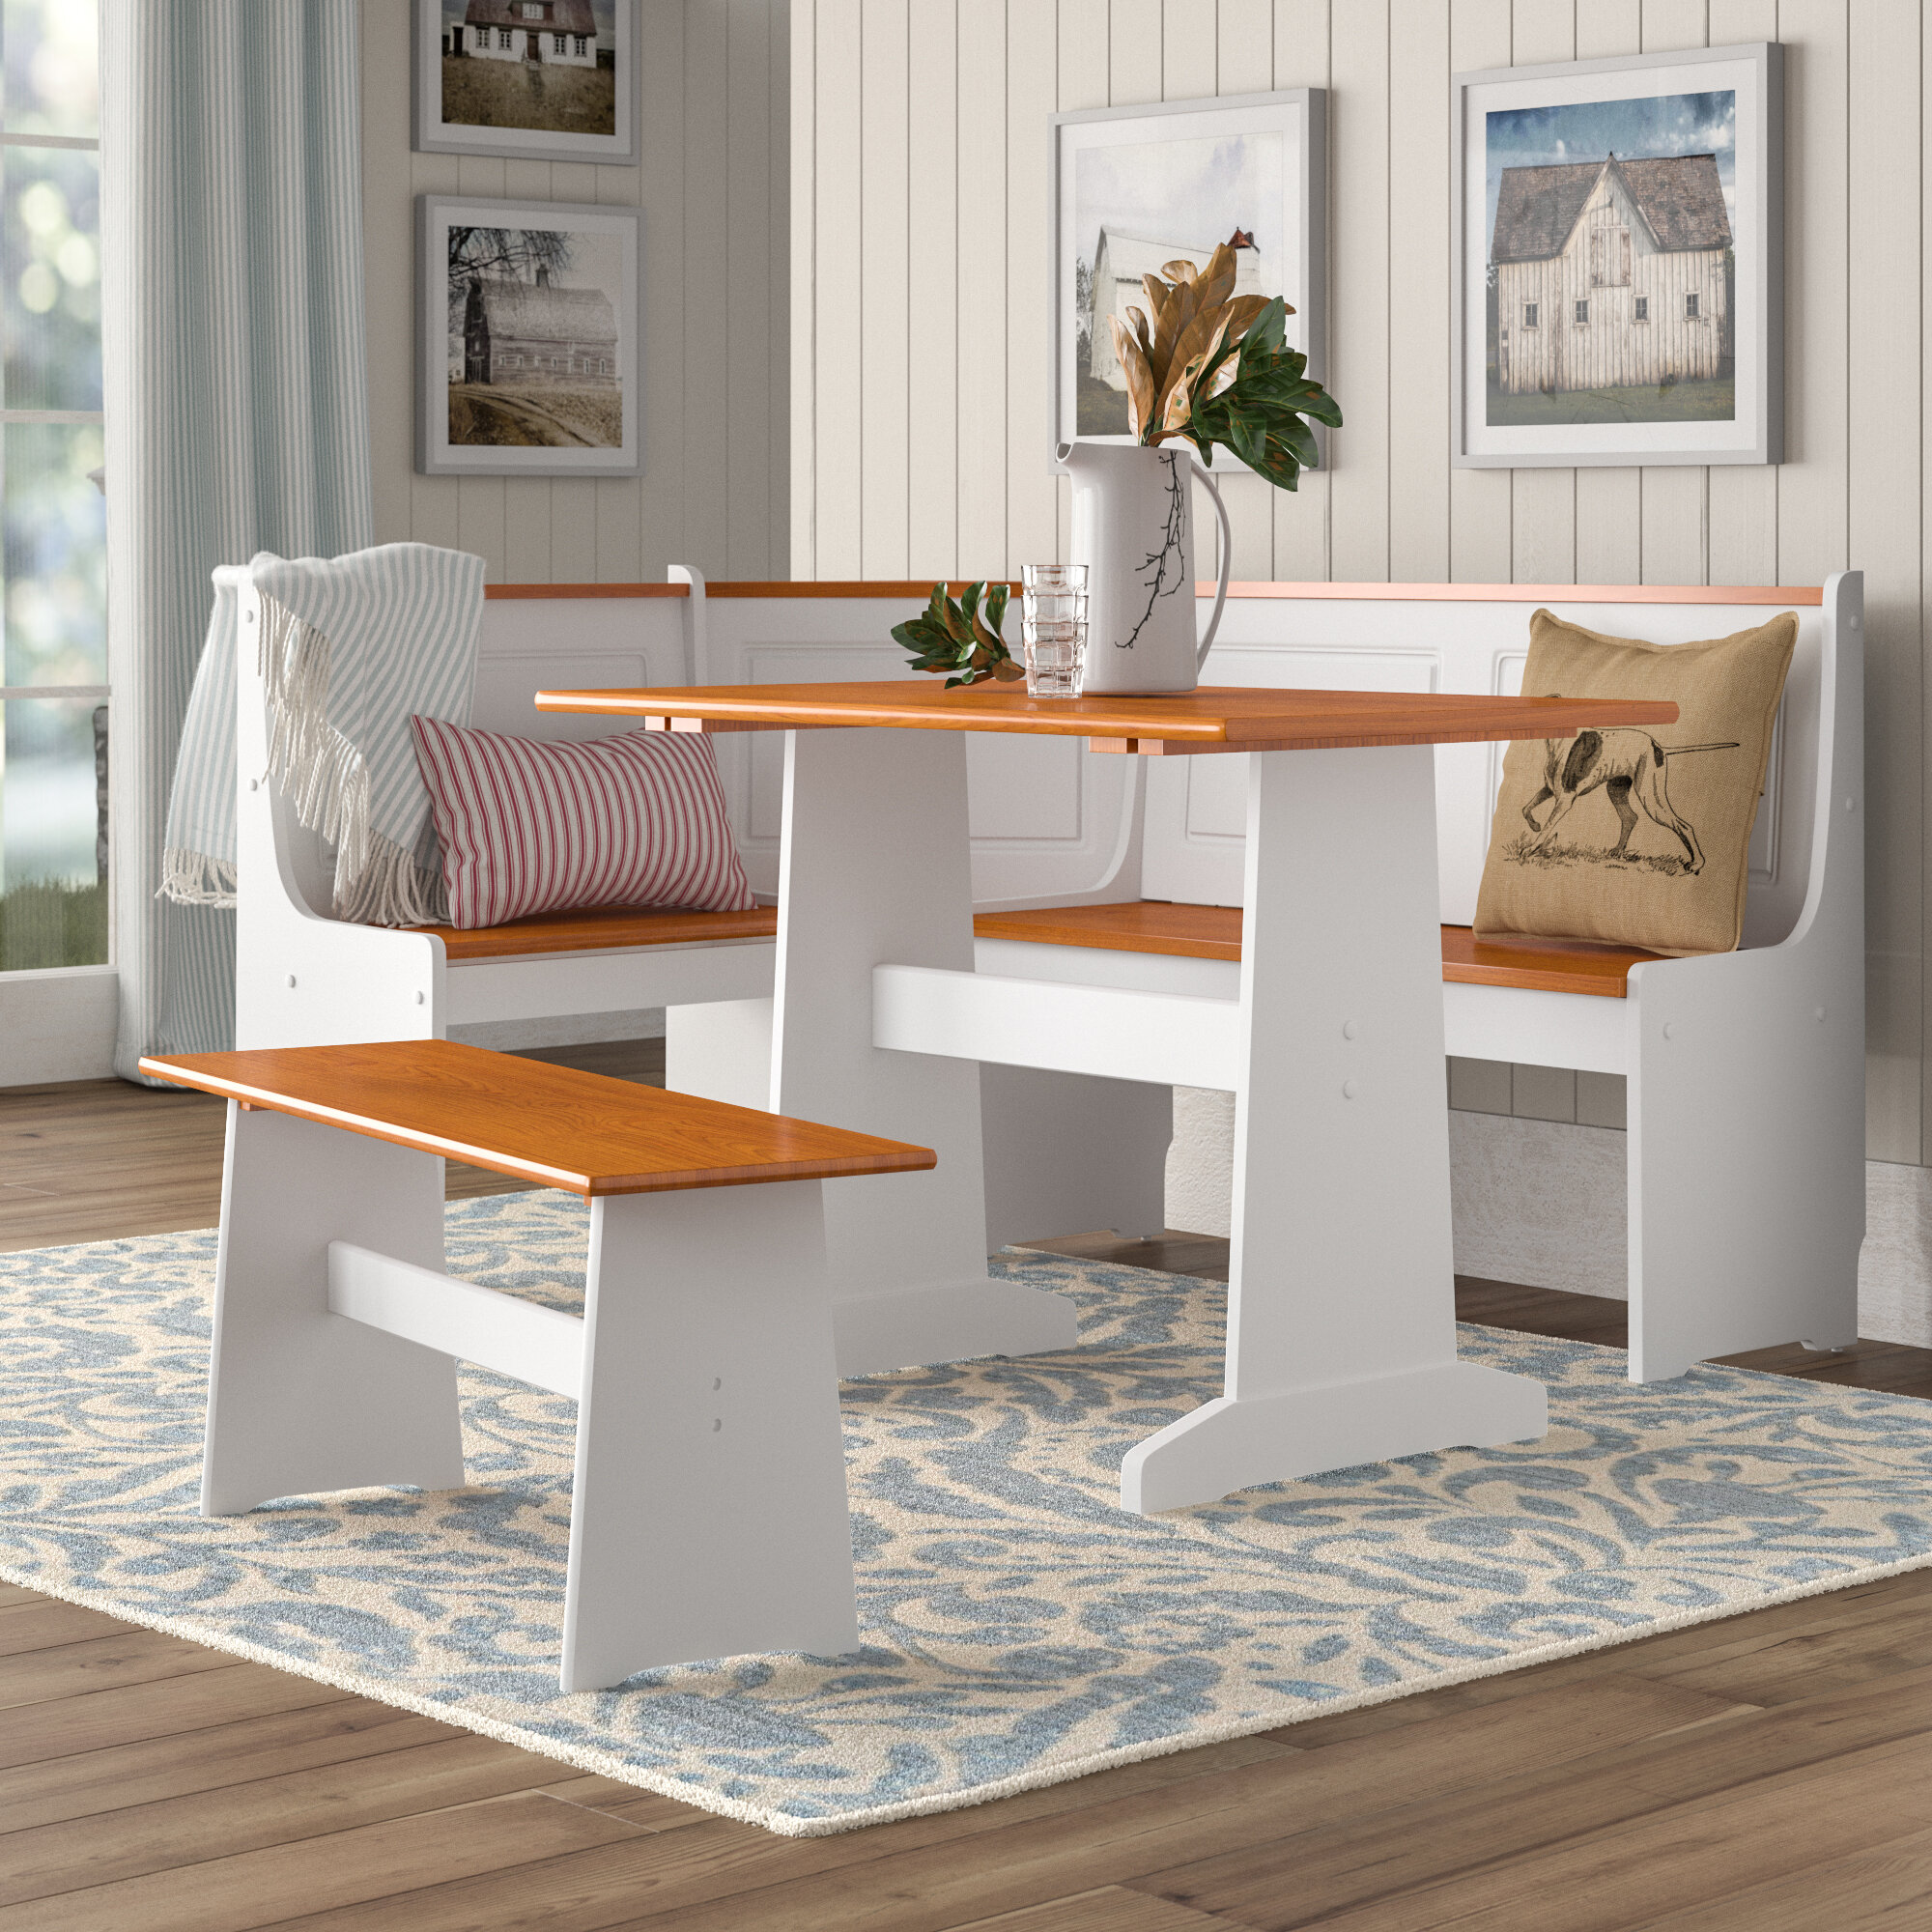 PananaHome Solid Pine Wood Dining Table Set with 2 Chairs I-Shape Kitchen Dining Room Natural Pine & White 